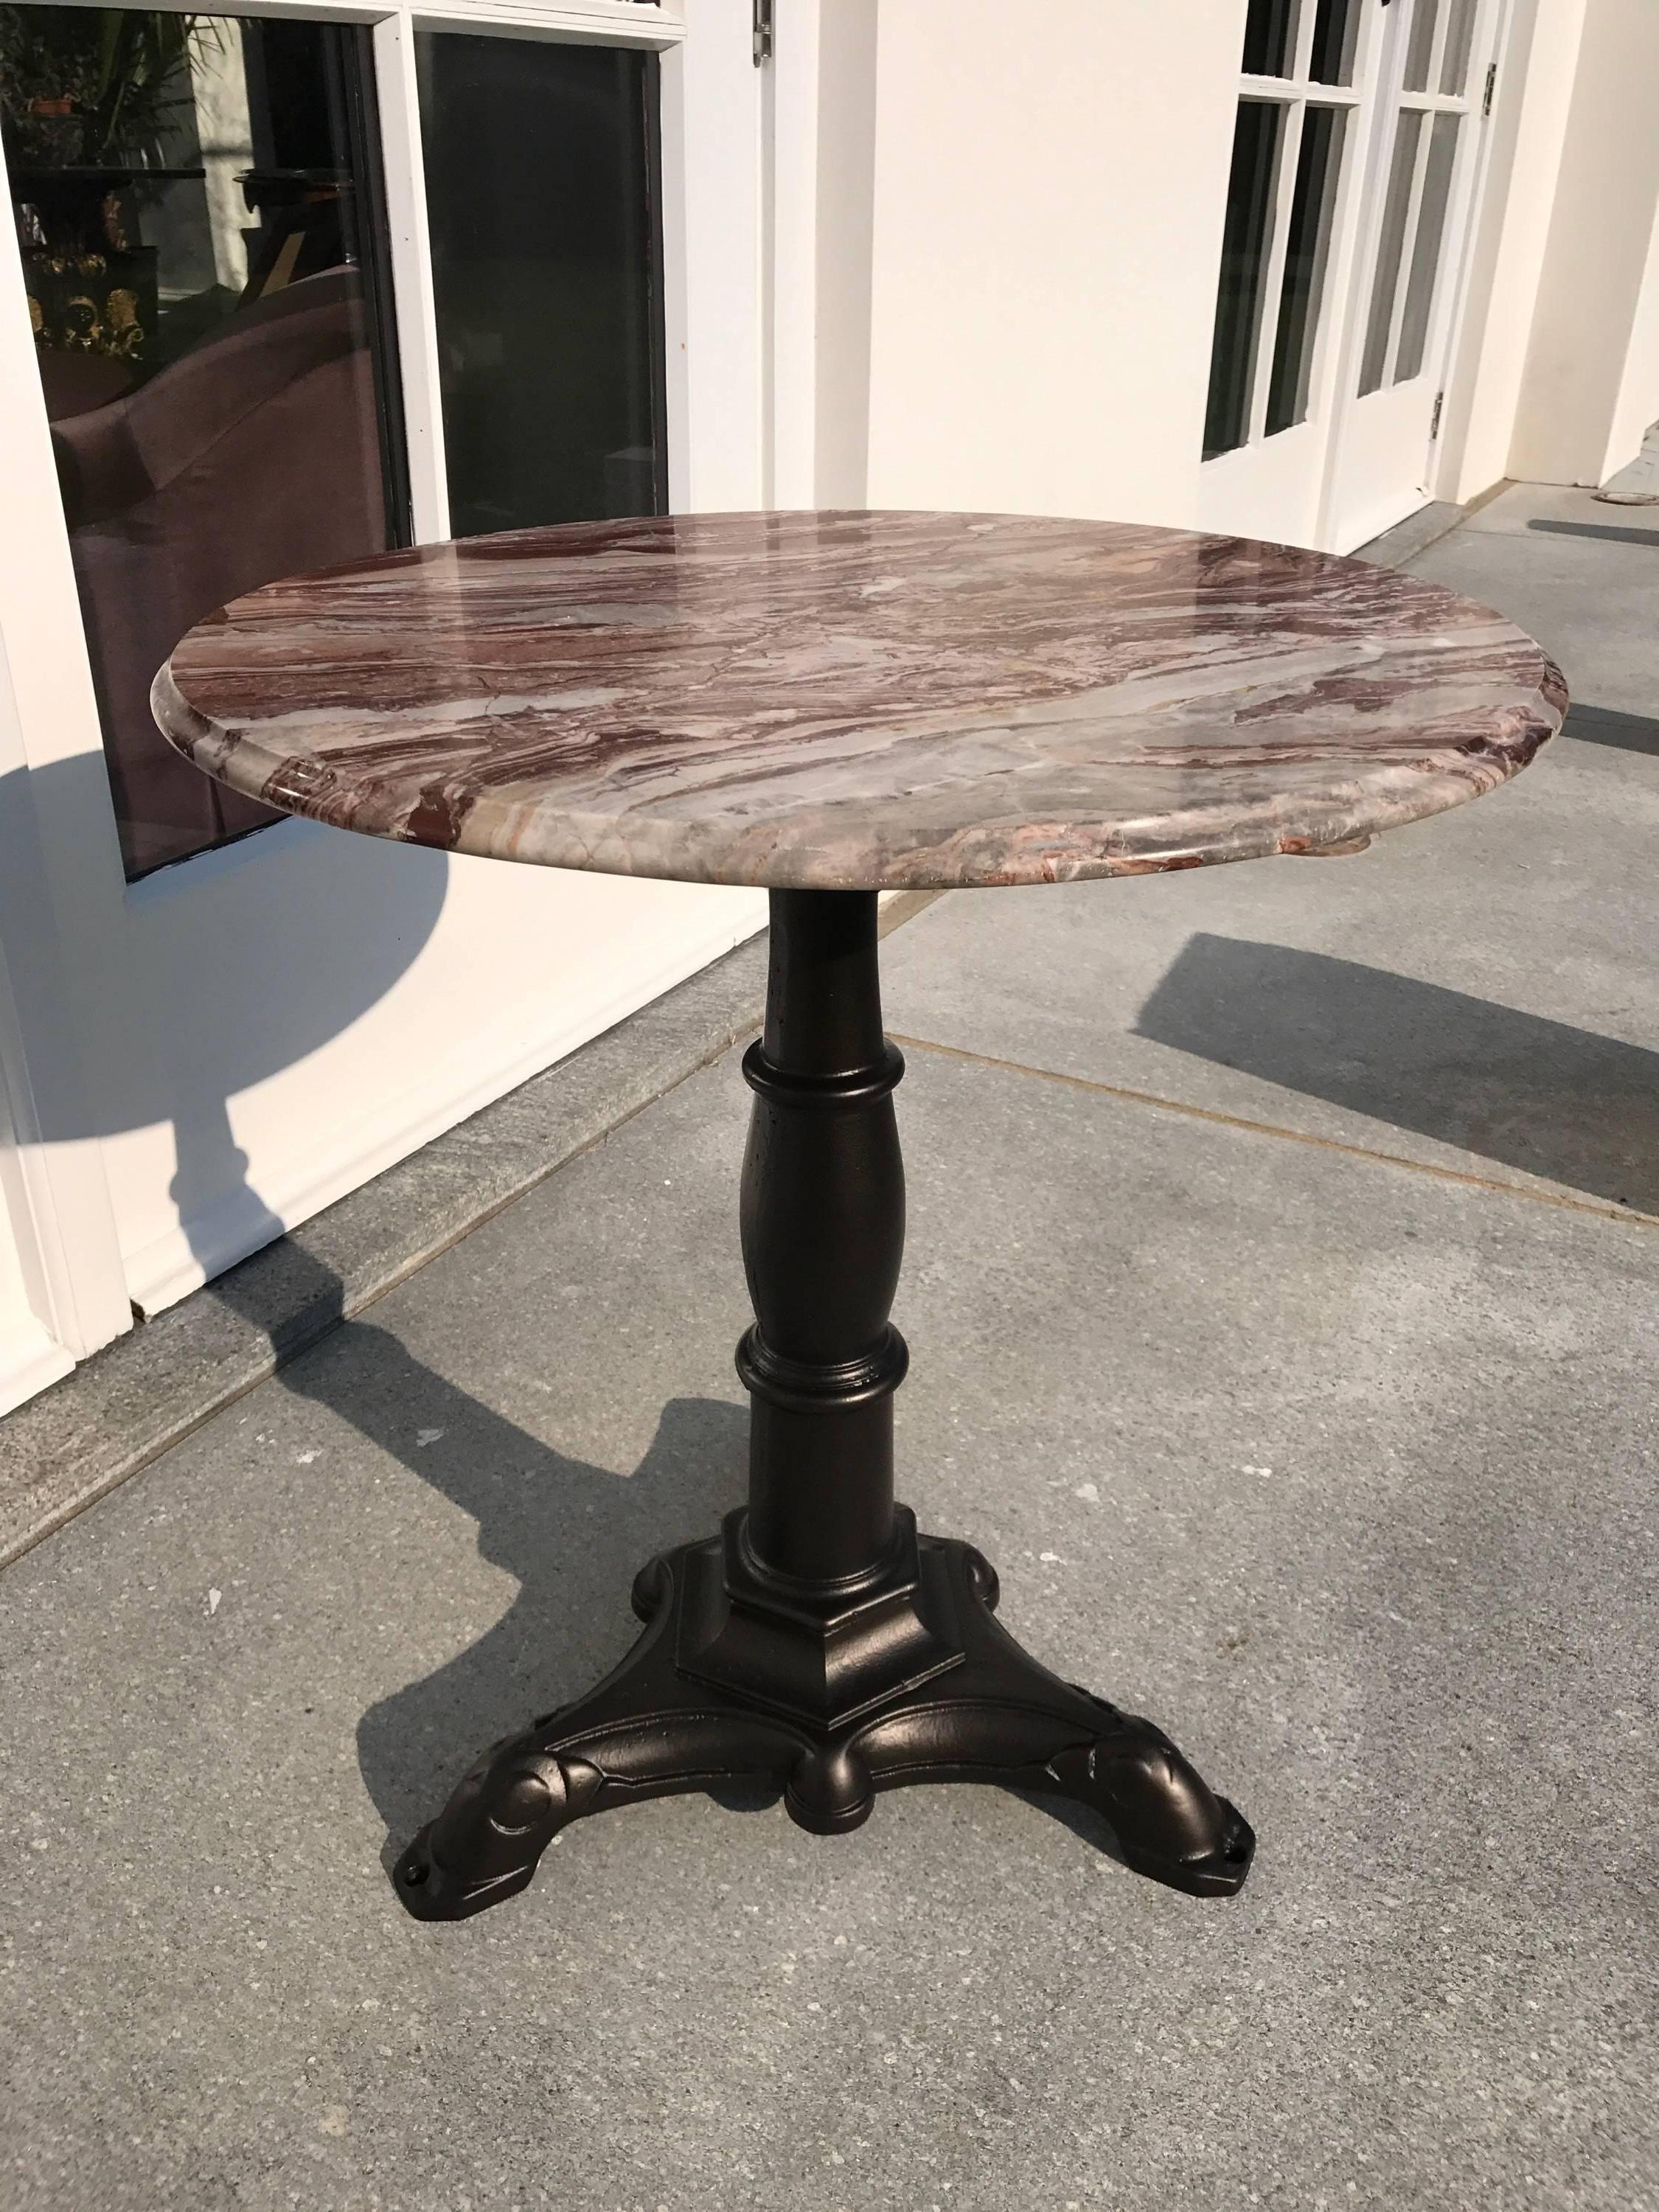 This beautiful late 19th century English side table is made of cast-iron, that we had powder coated in a dark bronze finish.
It has a later rouge marble top. 